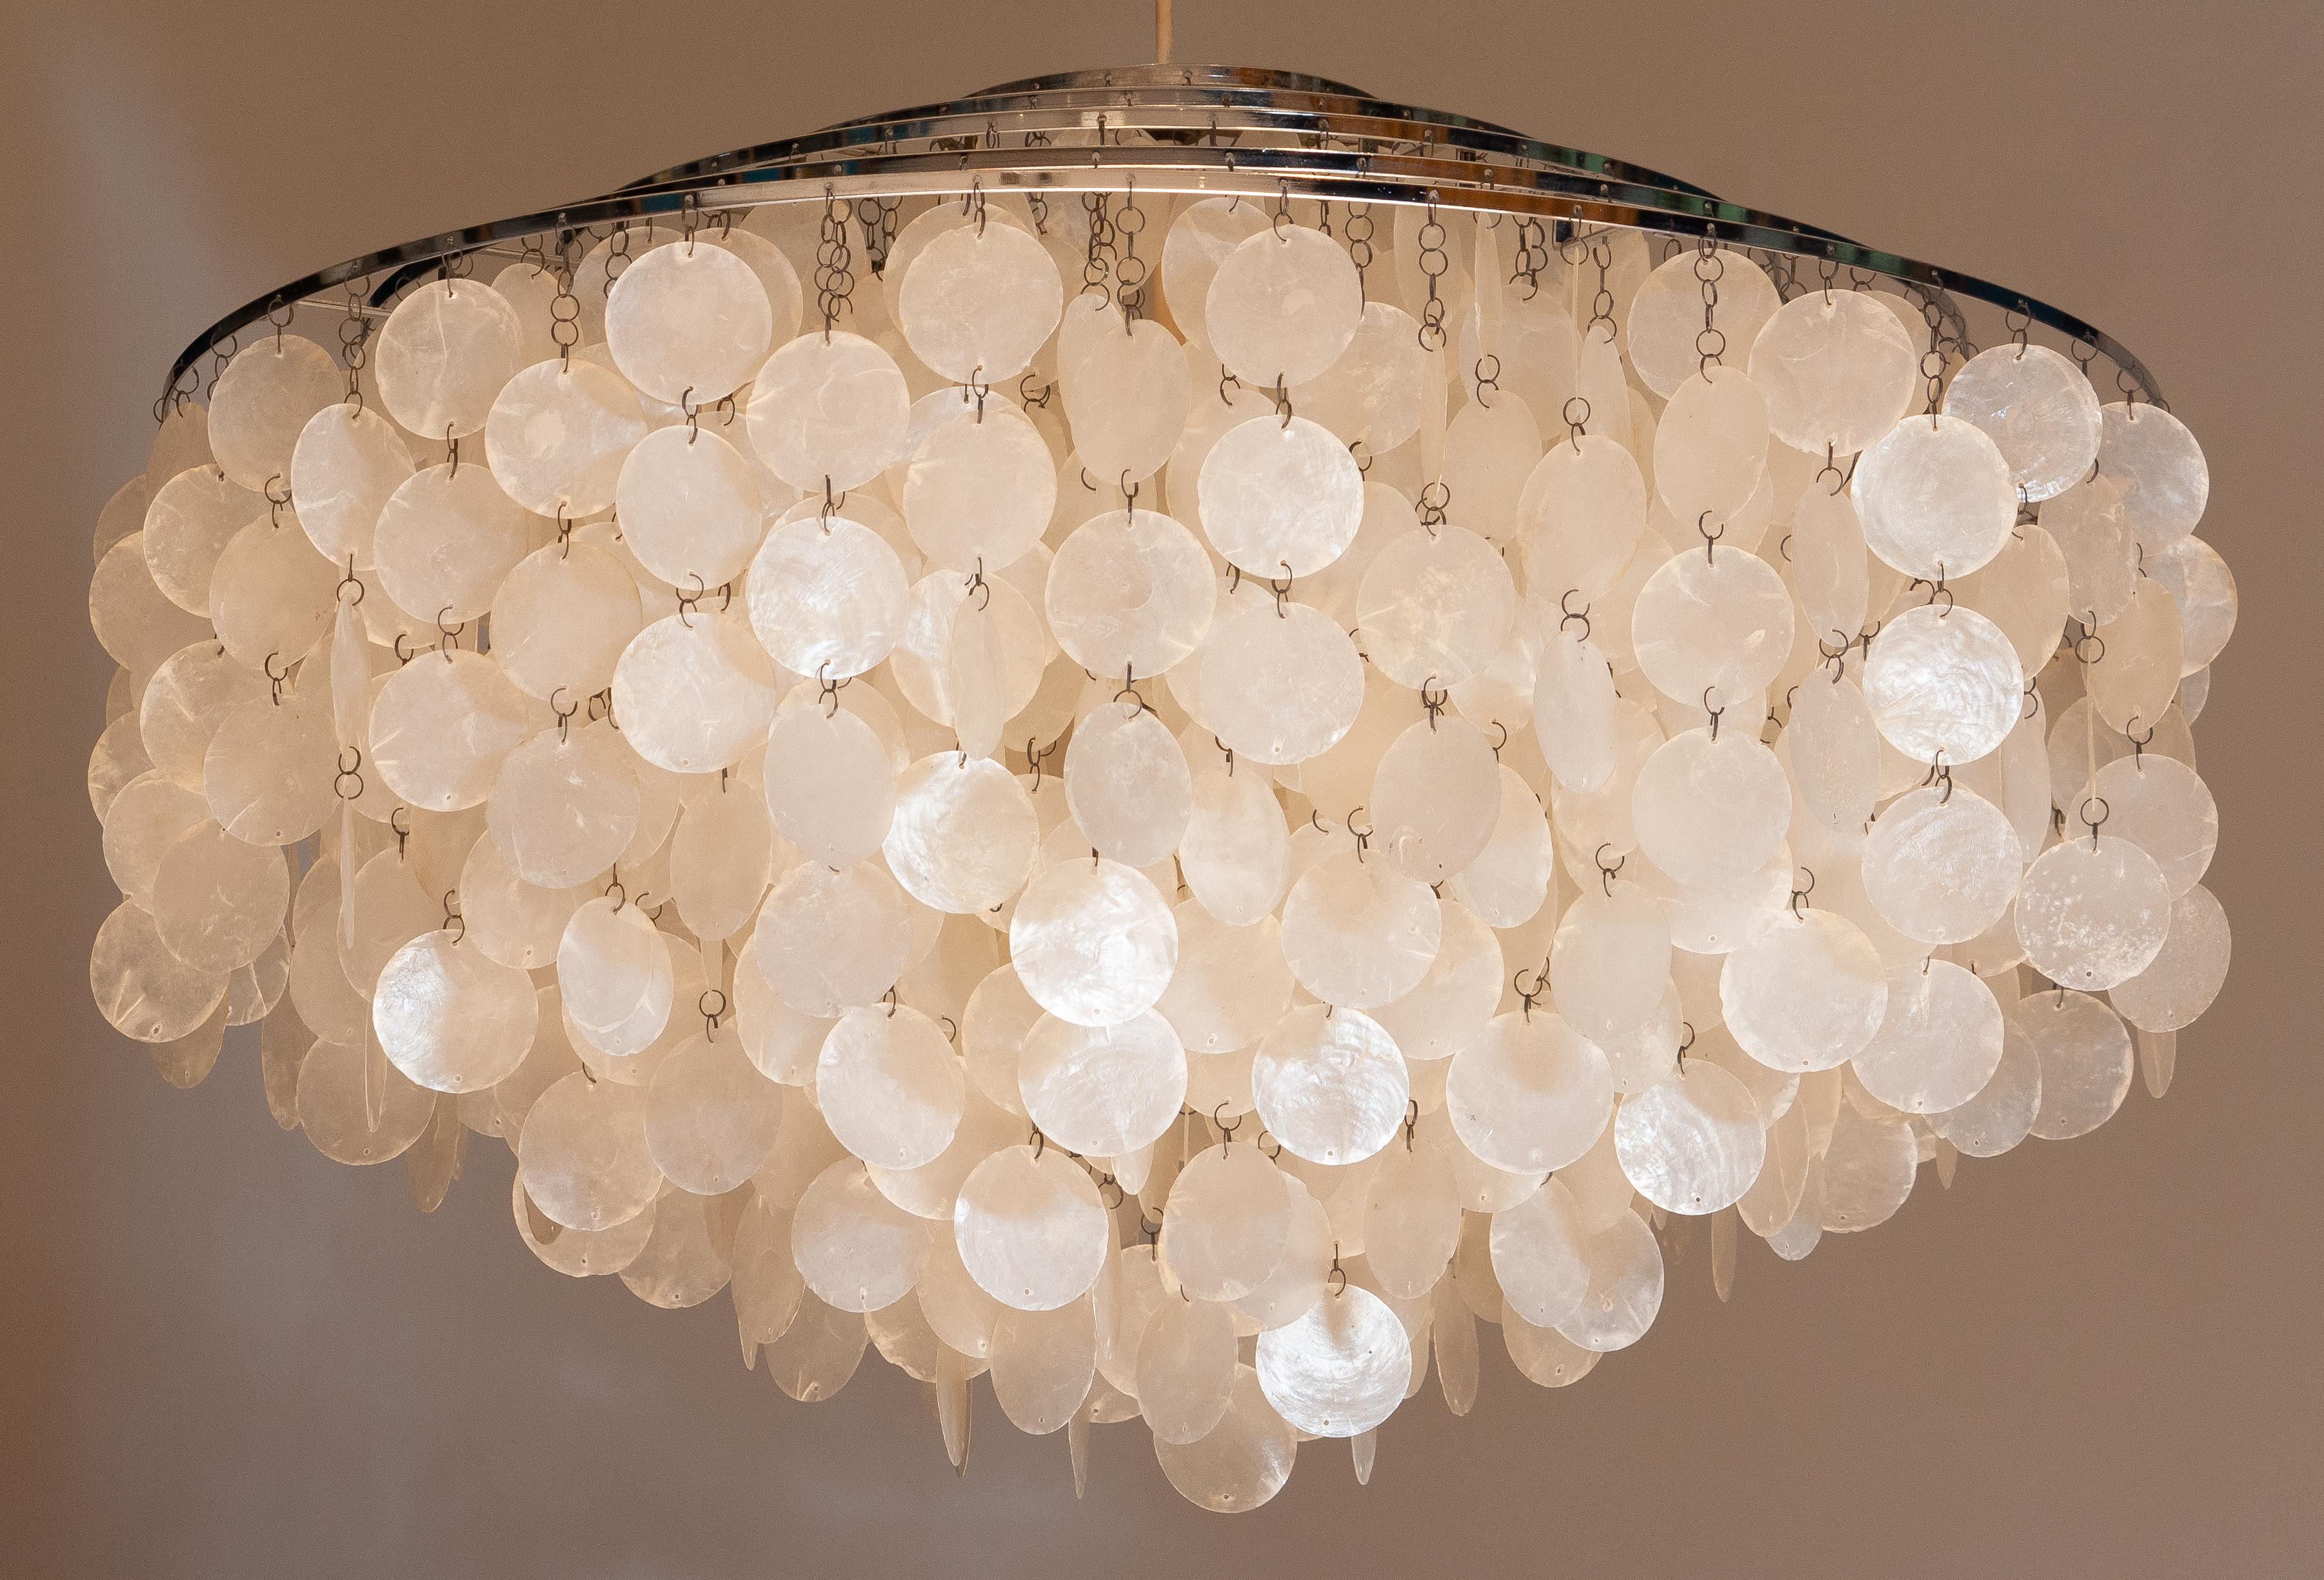 1960s Extra Large Capiz Shell Chandelier by Verner Panton for Luber AG. Swiss 1